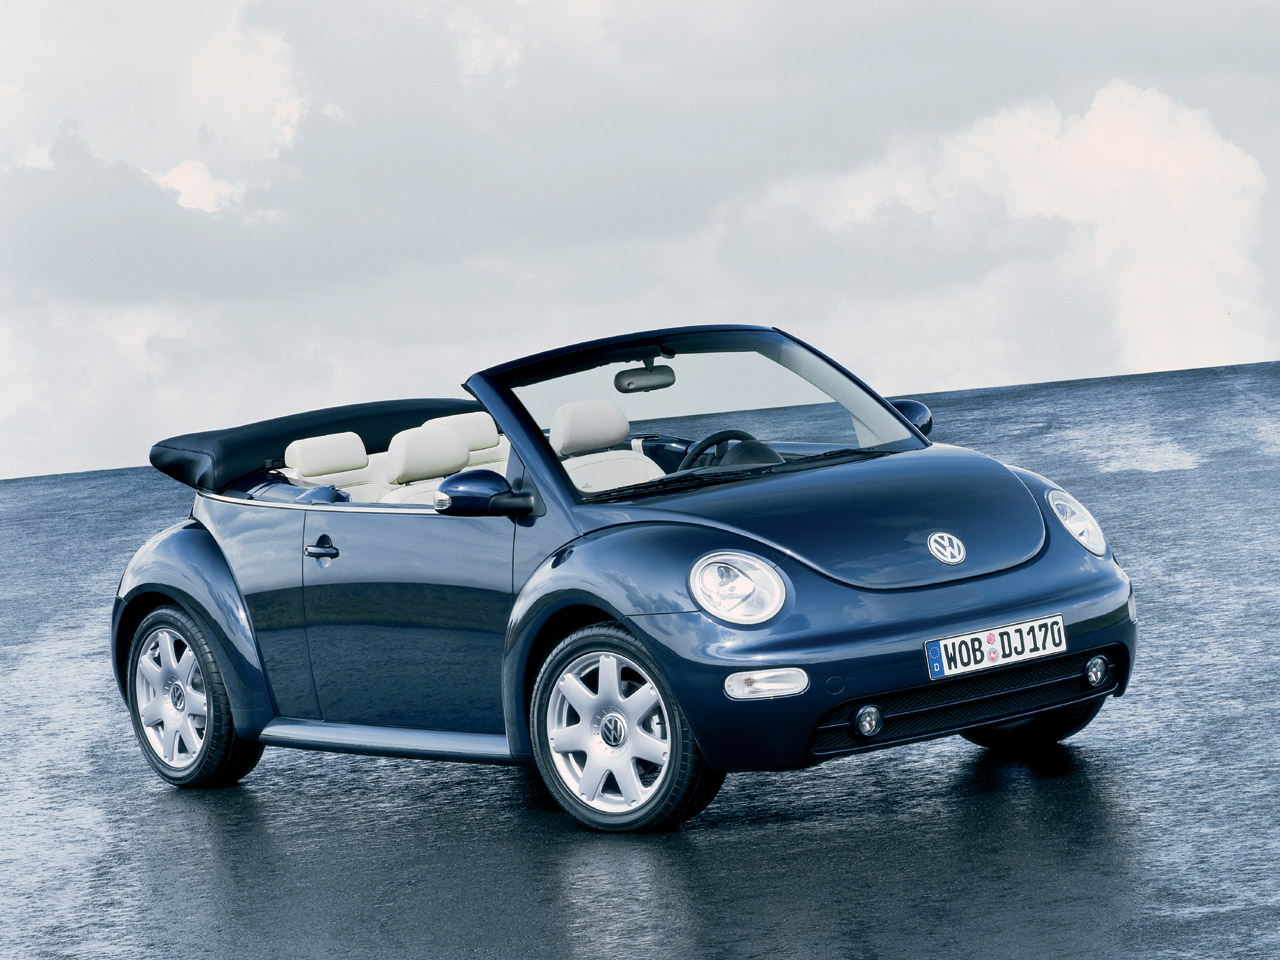 [VW-New-Beetle-Cabriolet-Blue-Front-Angle-1280x960.jpg]